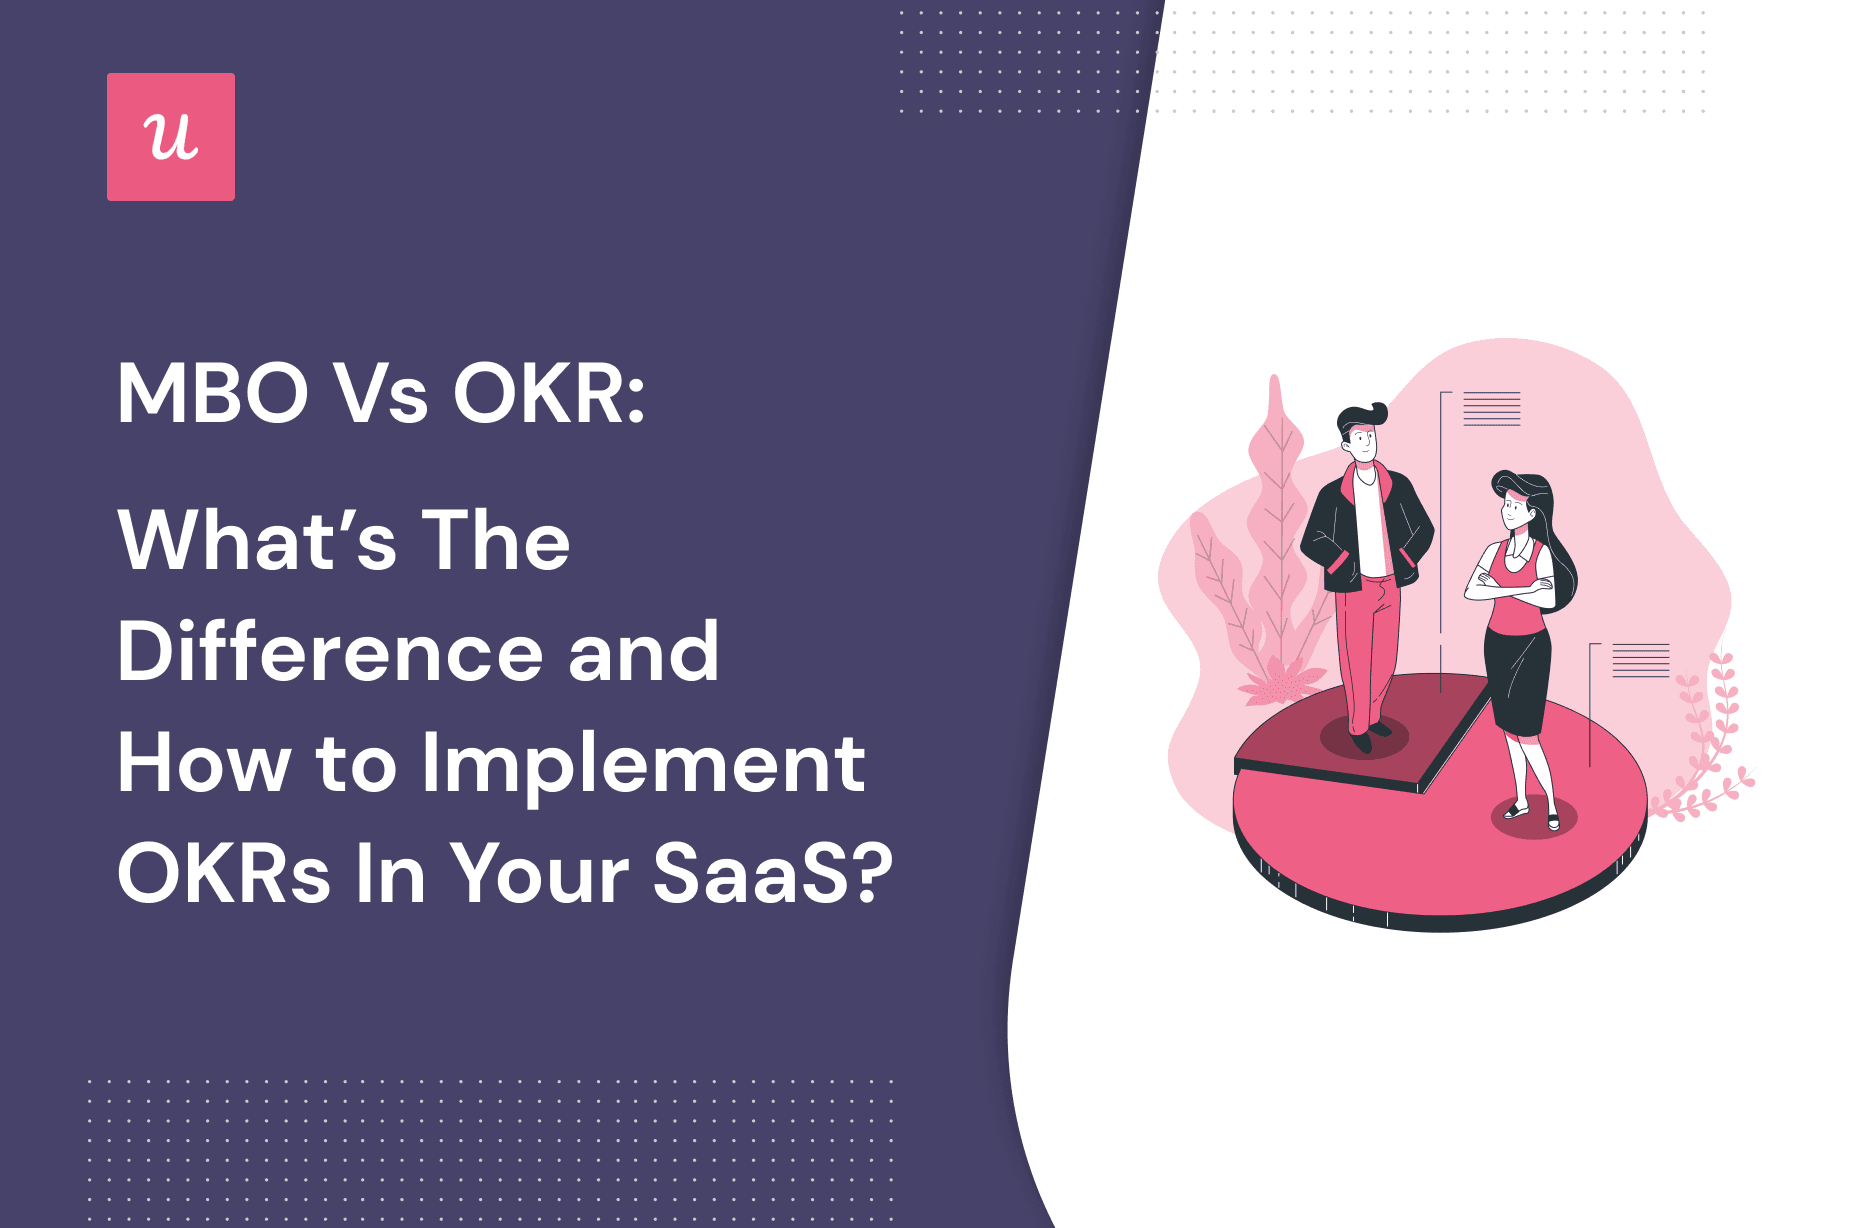 MBO vs OKR: What’s the Difference and How To Implement OKRs in Your SaaS?